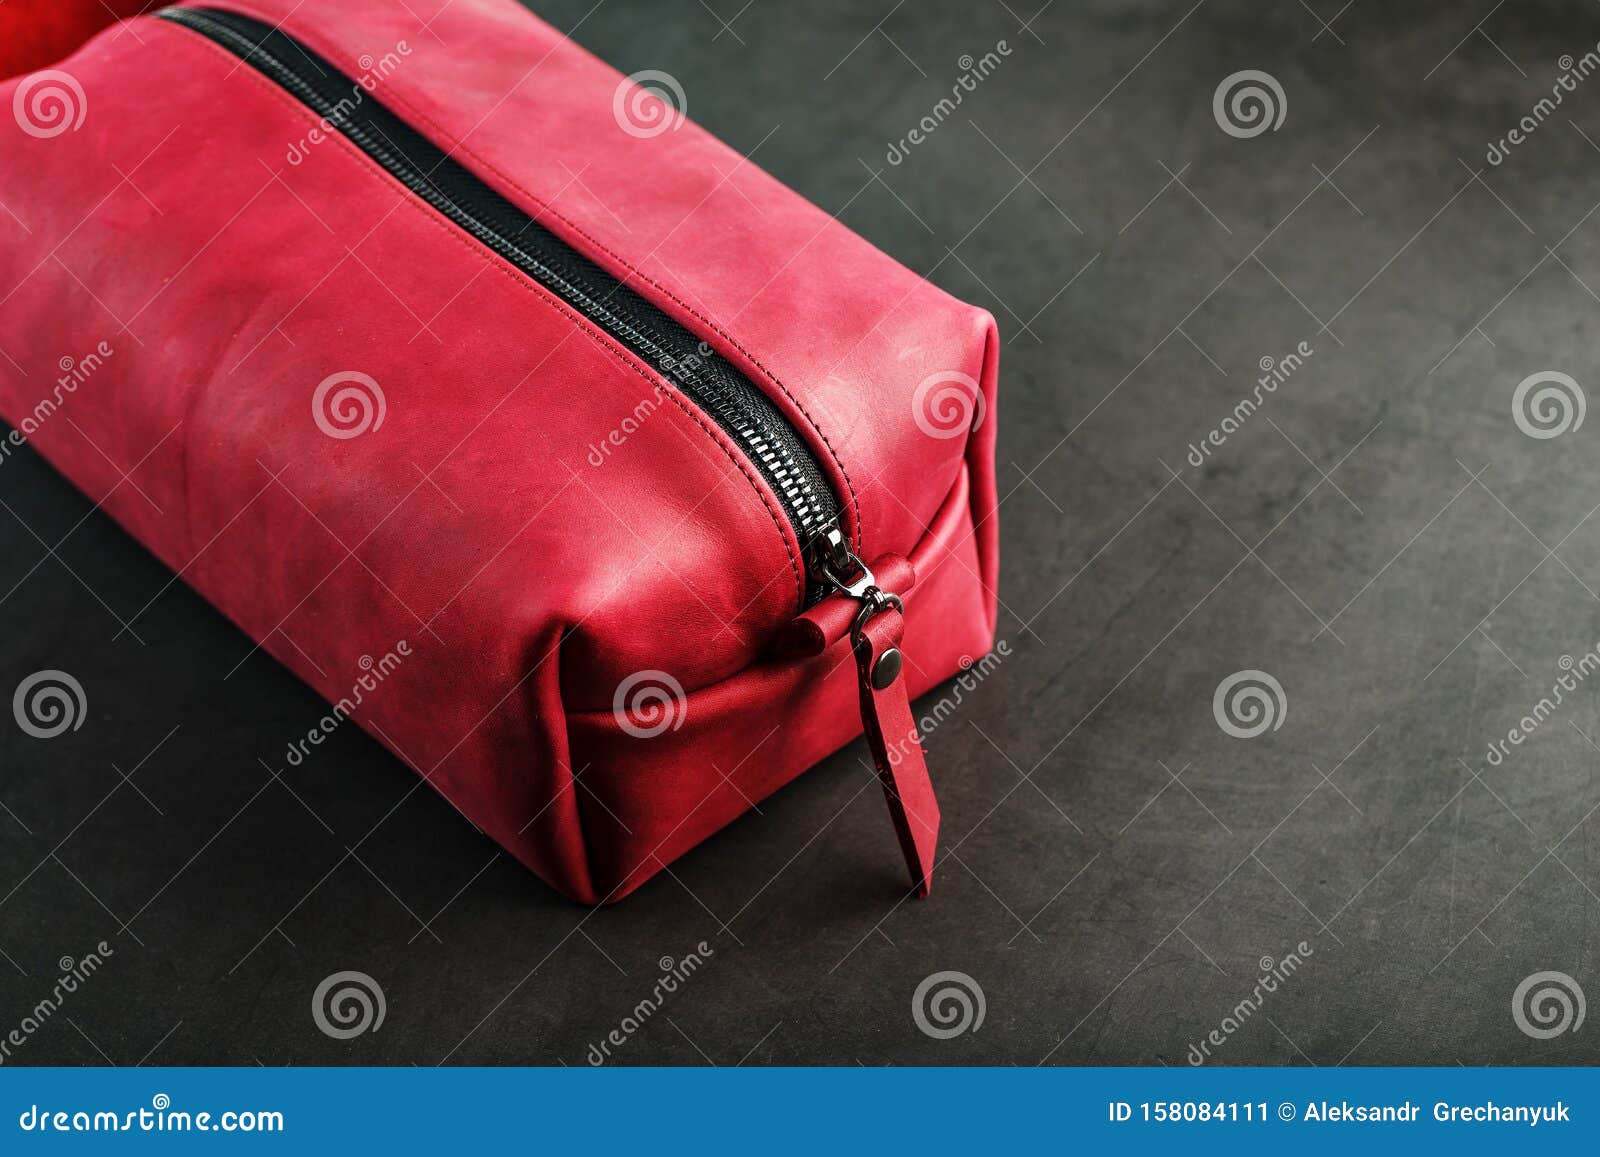 Bag for Cosmetics and Jewelry Made of Genuine Red Leather, on a Dark ...